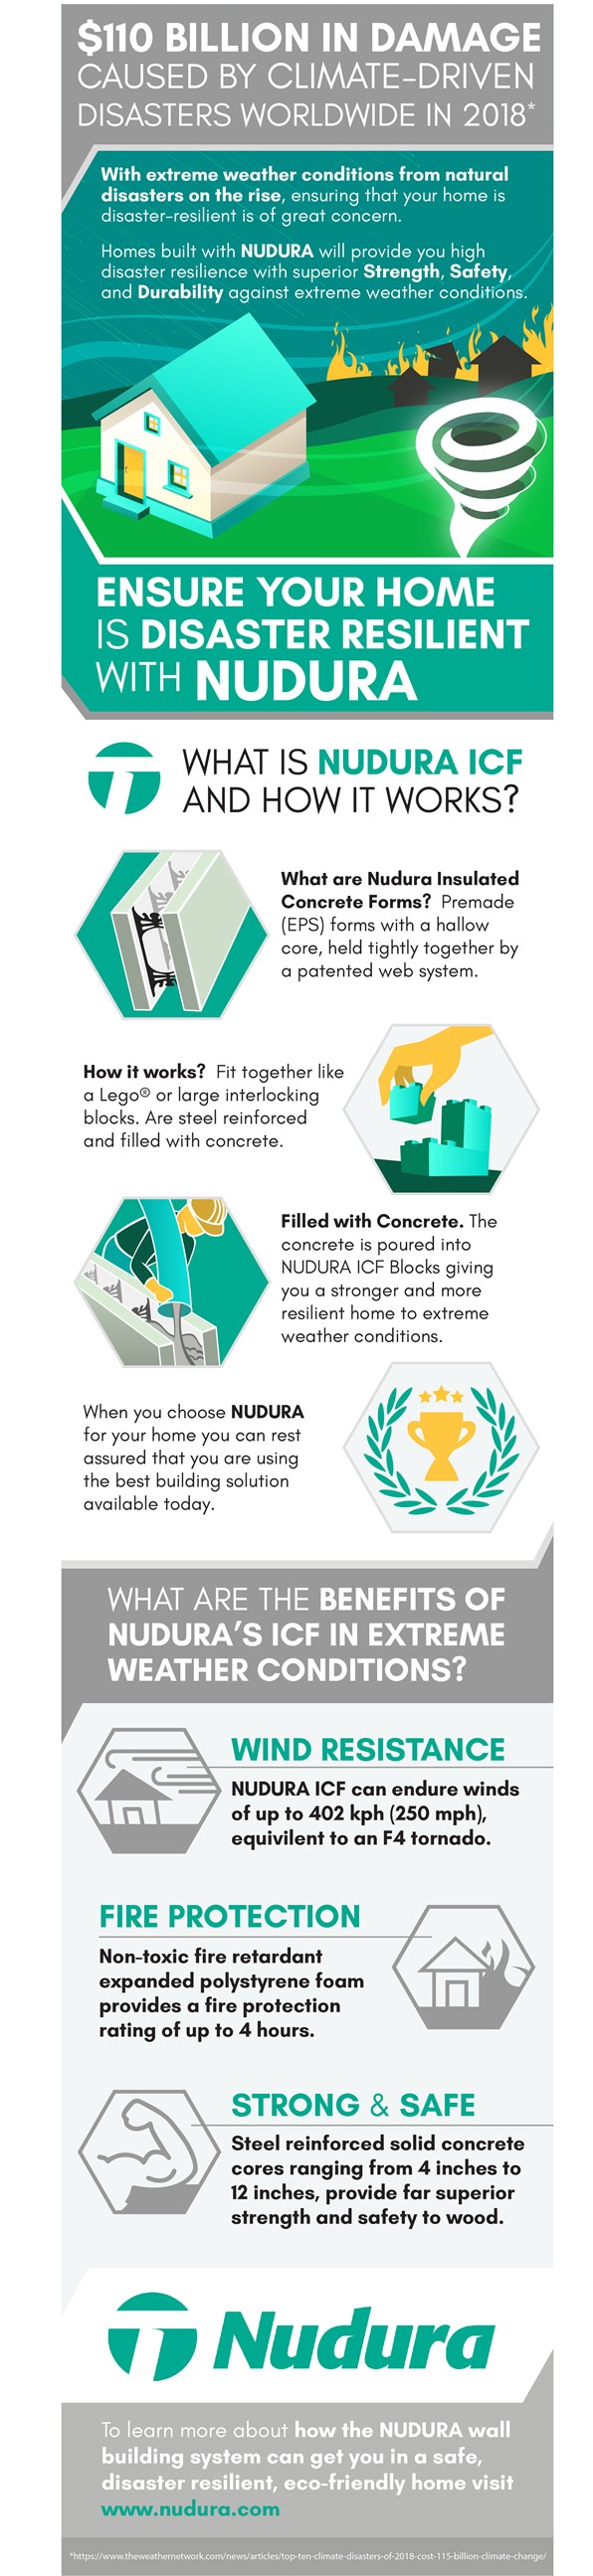 Nudura ICF disaster resilient infographic